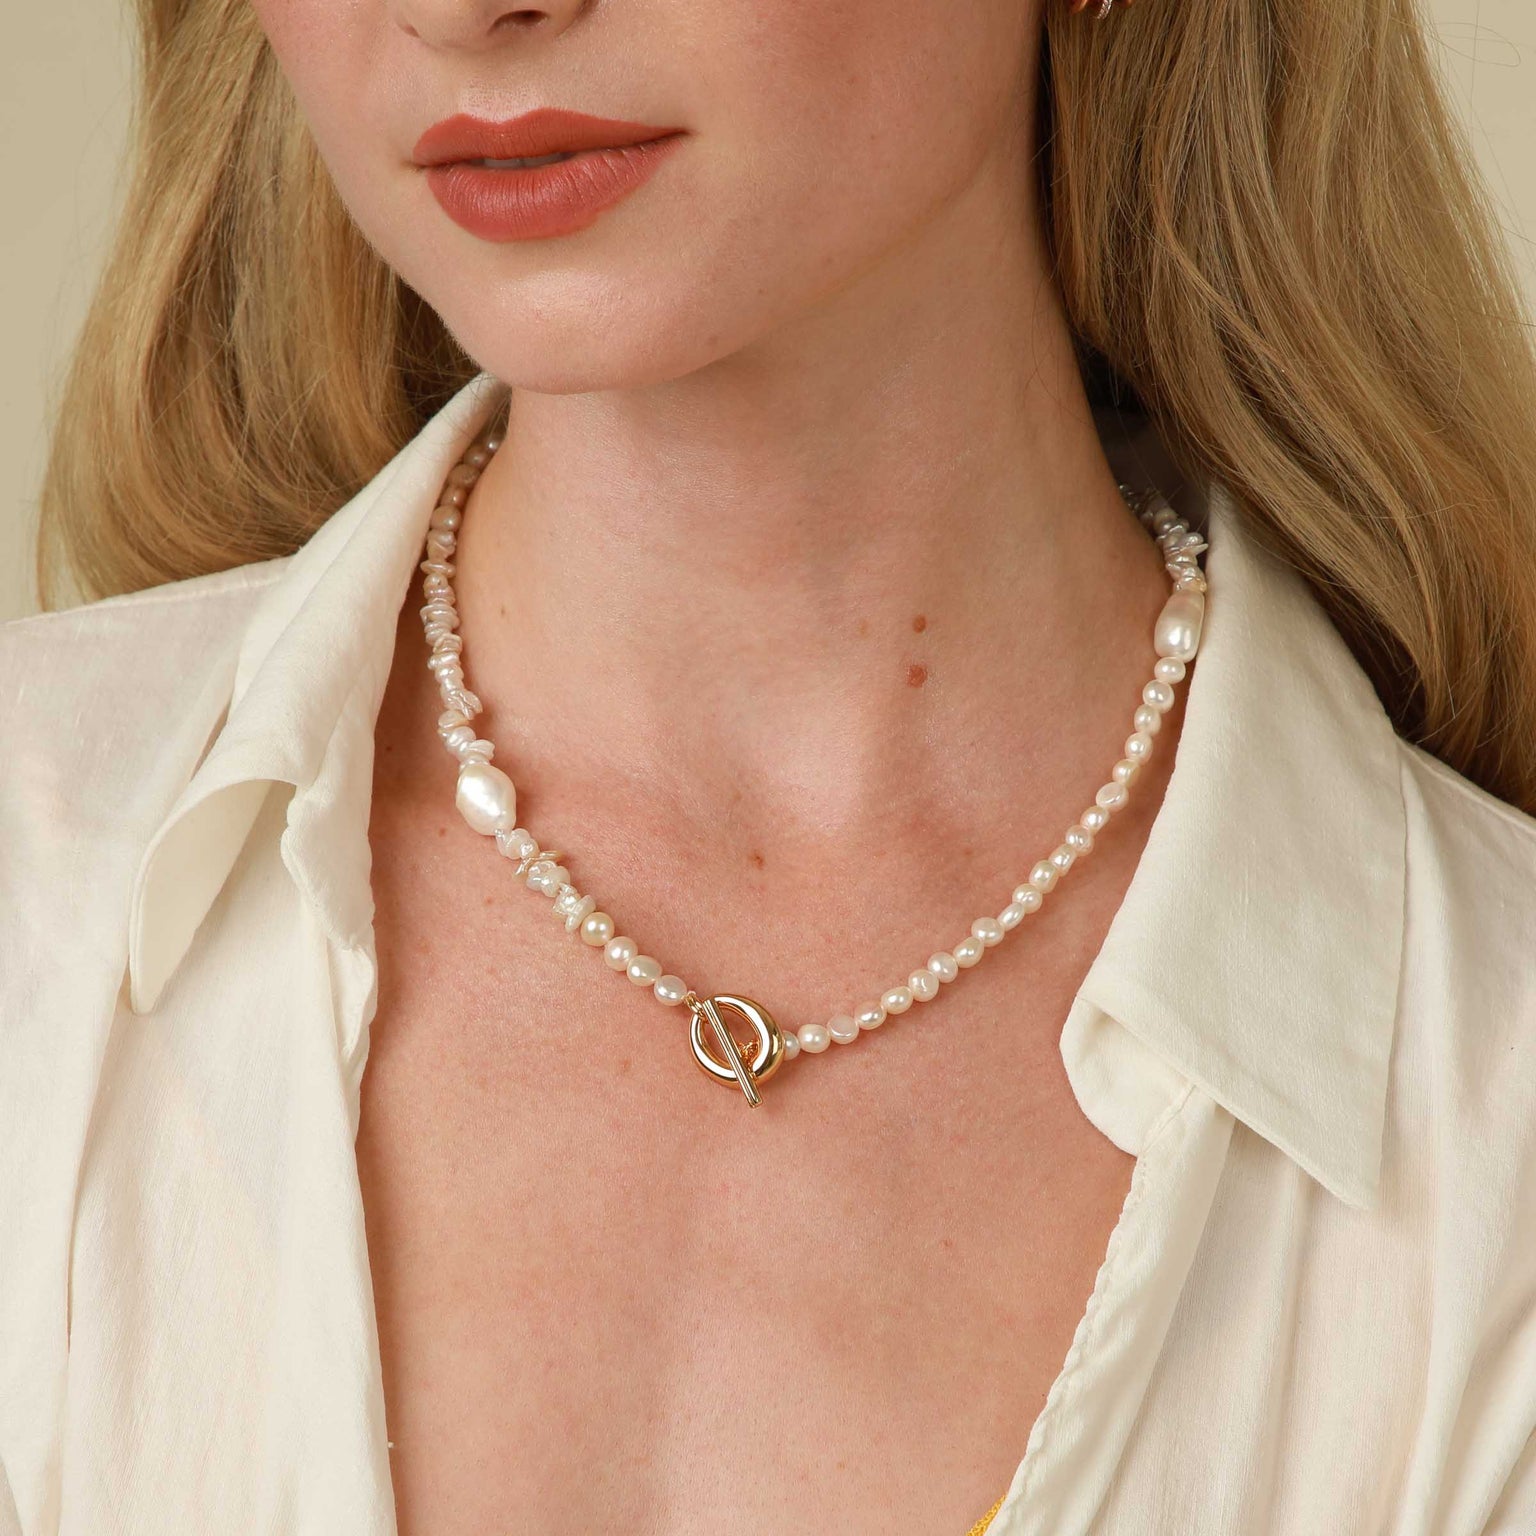 Serenity Pearl Beaded T-Bar Necklace in Gold worn